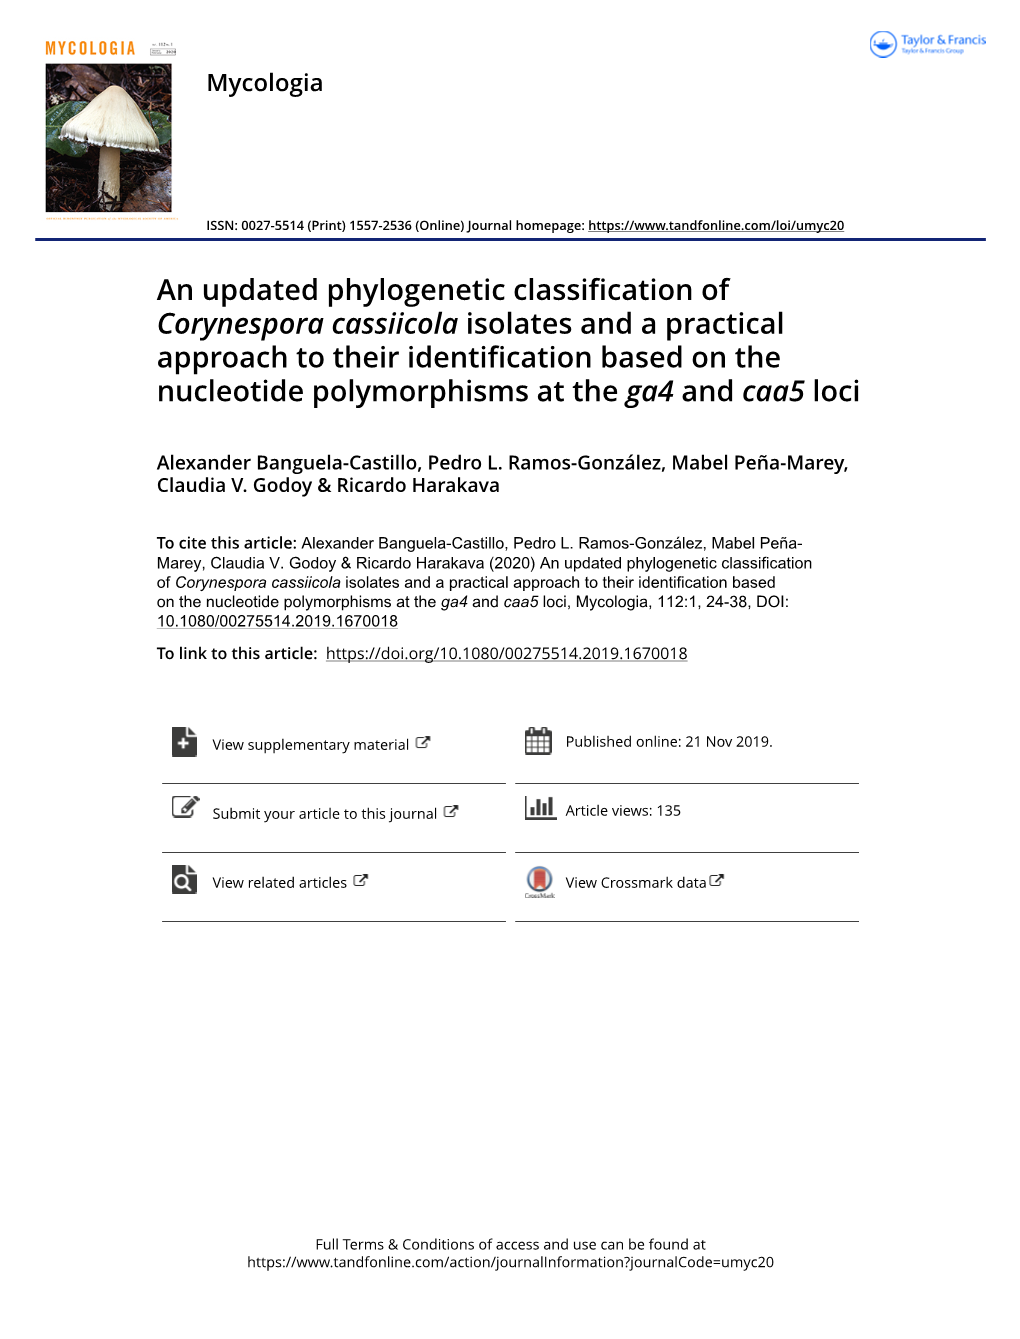 An Updated Phylogenetic Classification of Corynespora Cassiicola Isolates